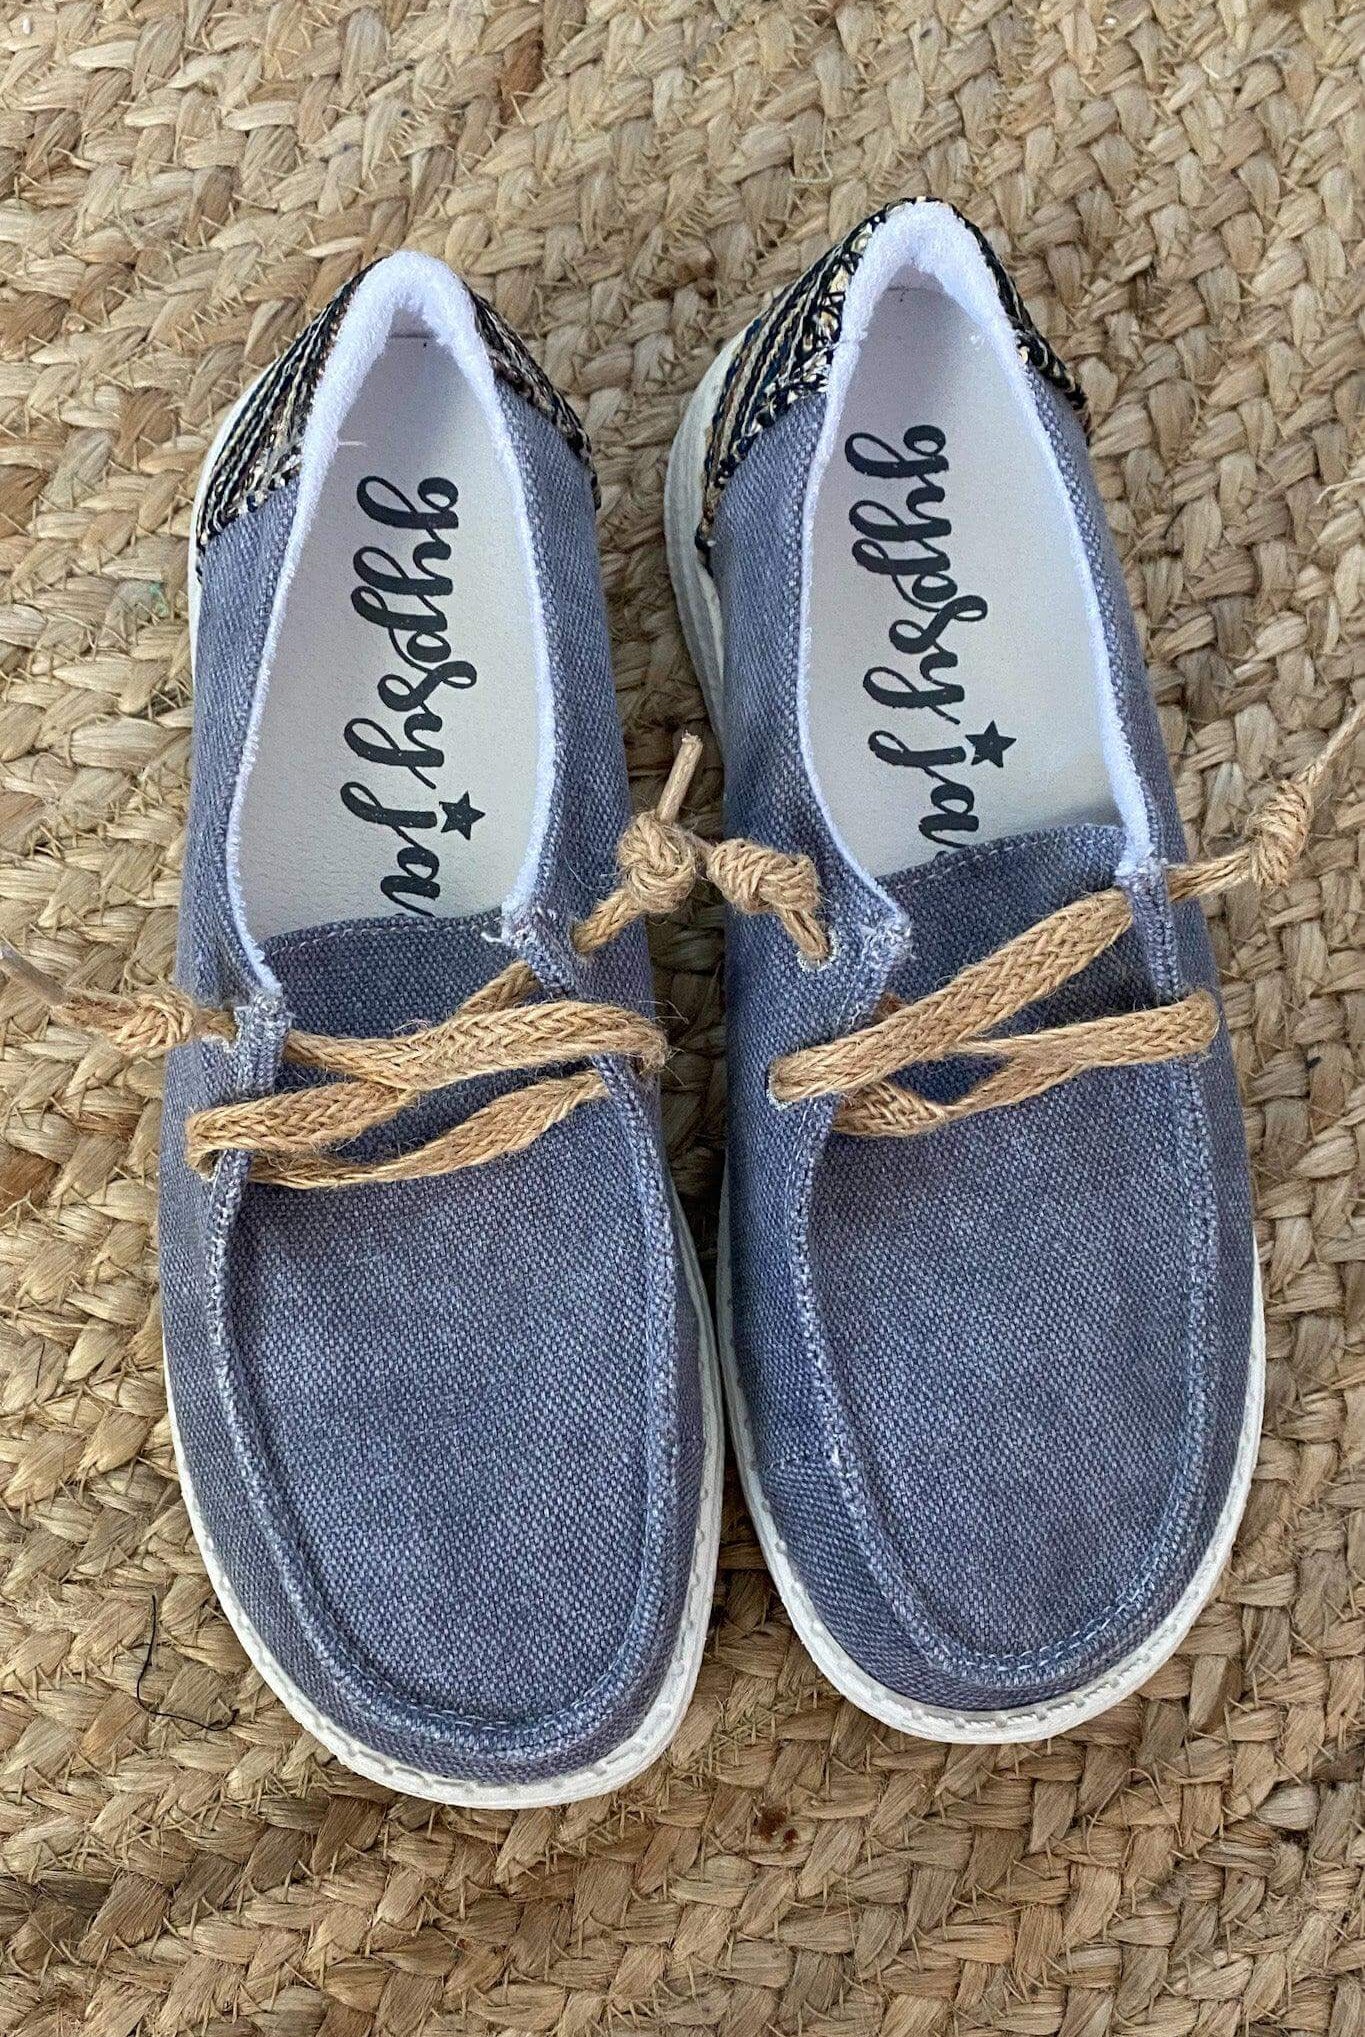 *Final Sale* Poppin' Sneakers - Grey - Bunky & Marie's Boutique